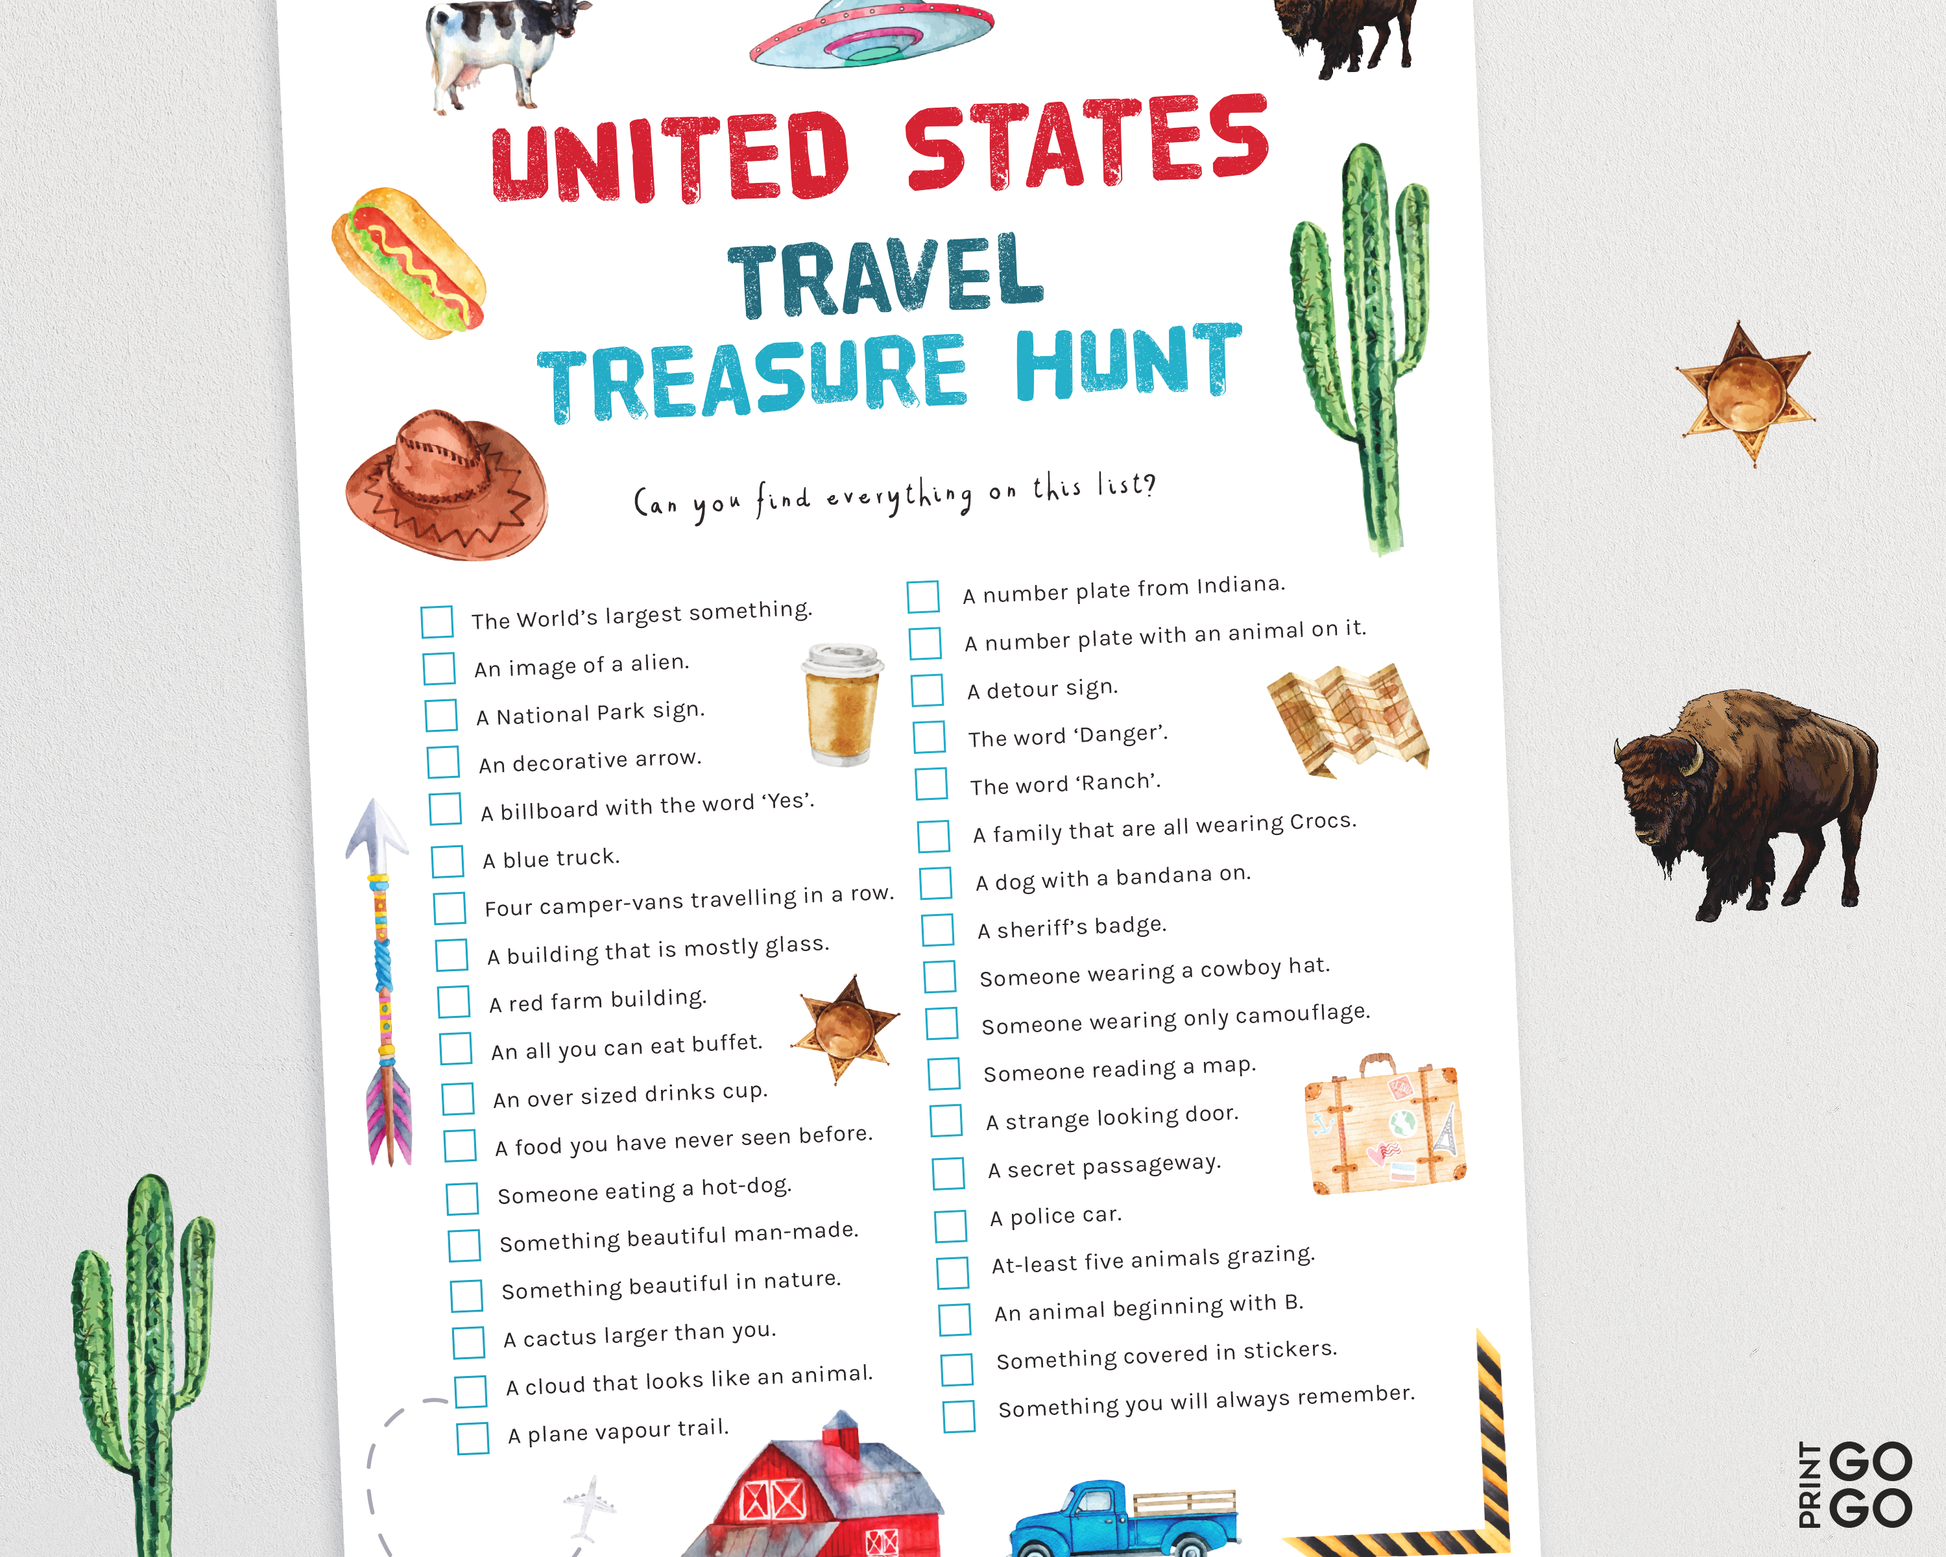 Spark curiosity in kids and keep them entertained on your holiday, or staycation, in the United States. Can they find all the items on the list?